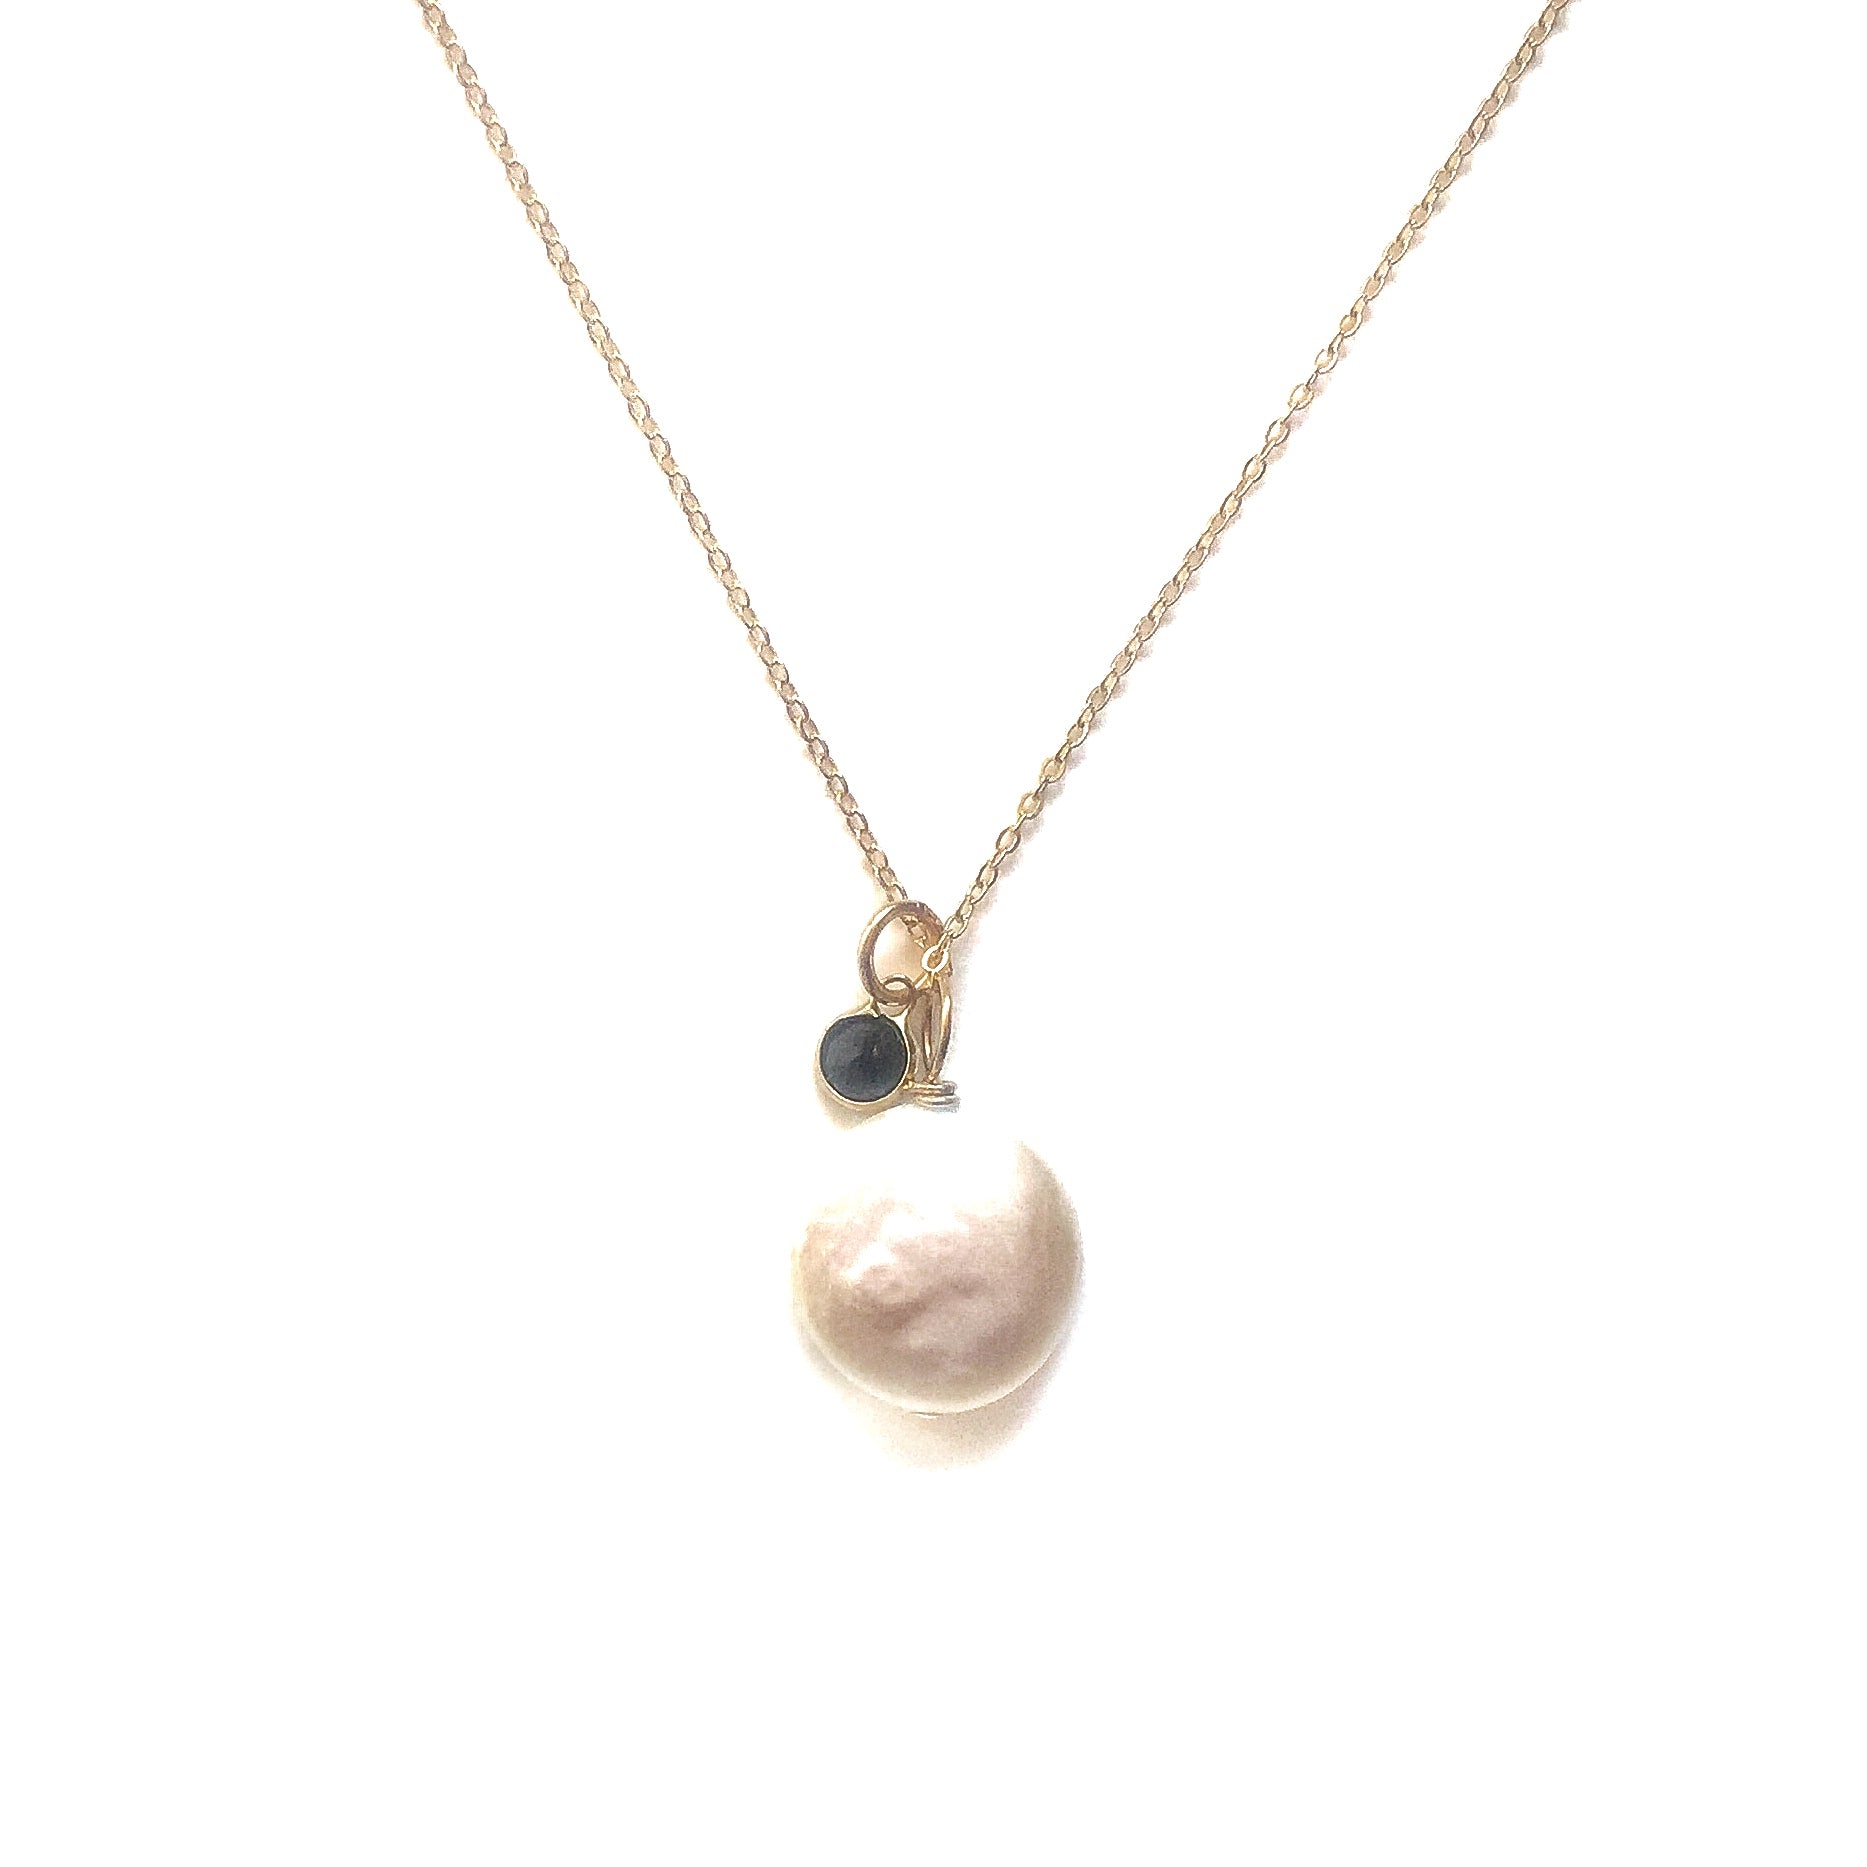 Petite Gemstone Necklace with White Freshwater Pearl Robyn Canady 